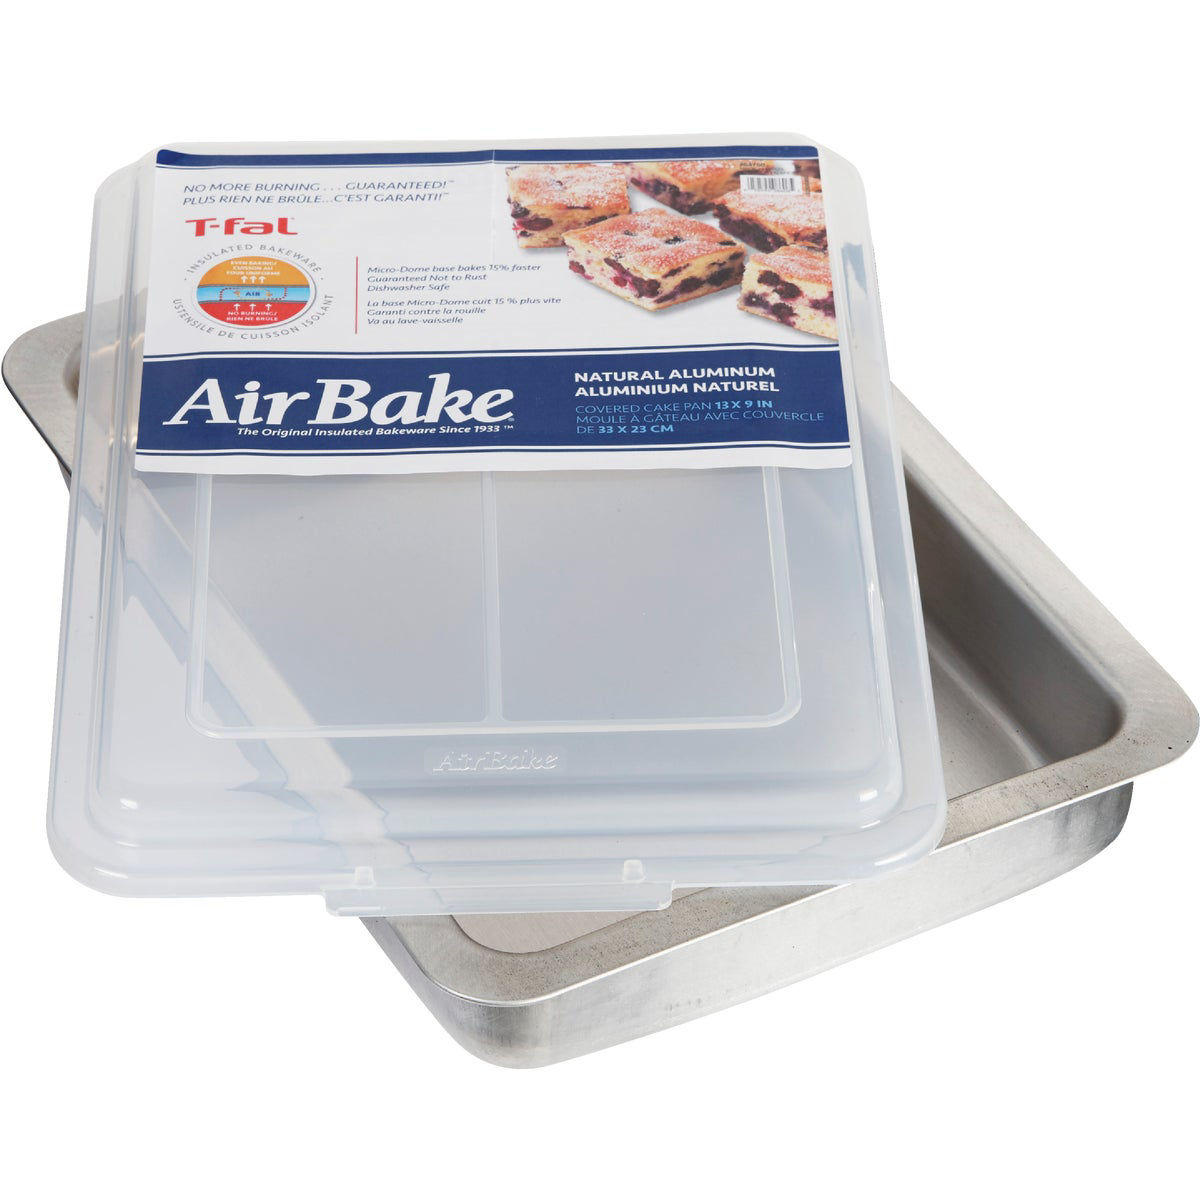 T-Fal Airbake Natural Large Cookie Sheet with Covered Cake Pan Set